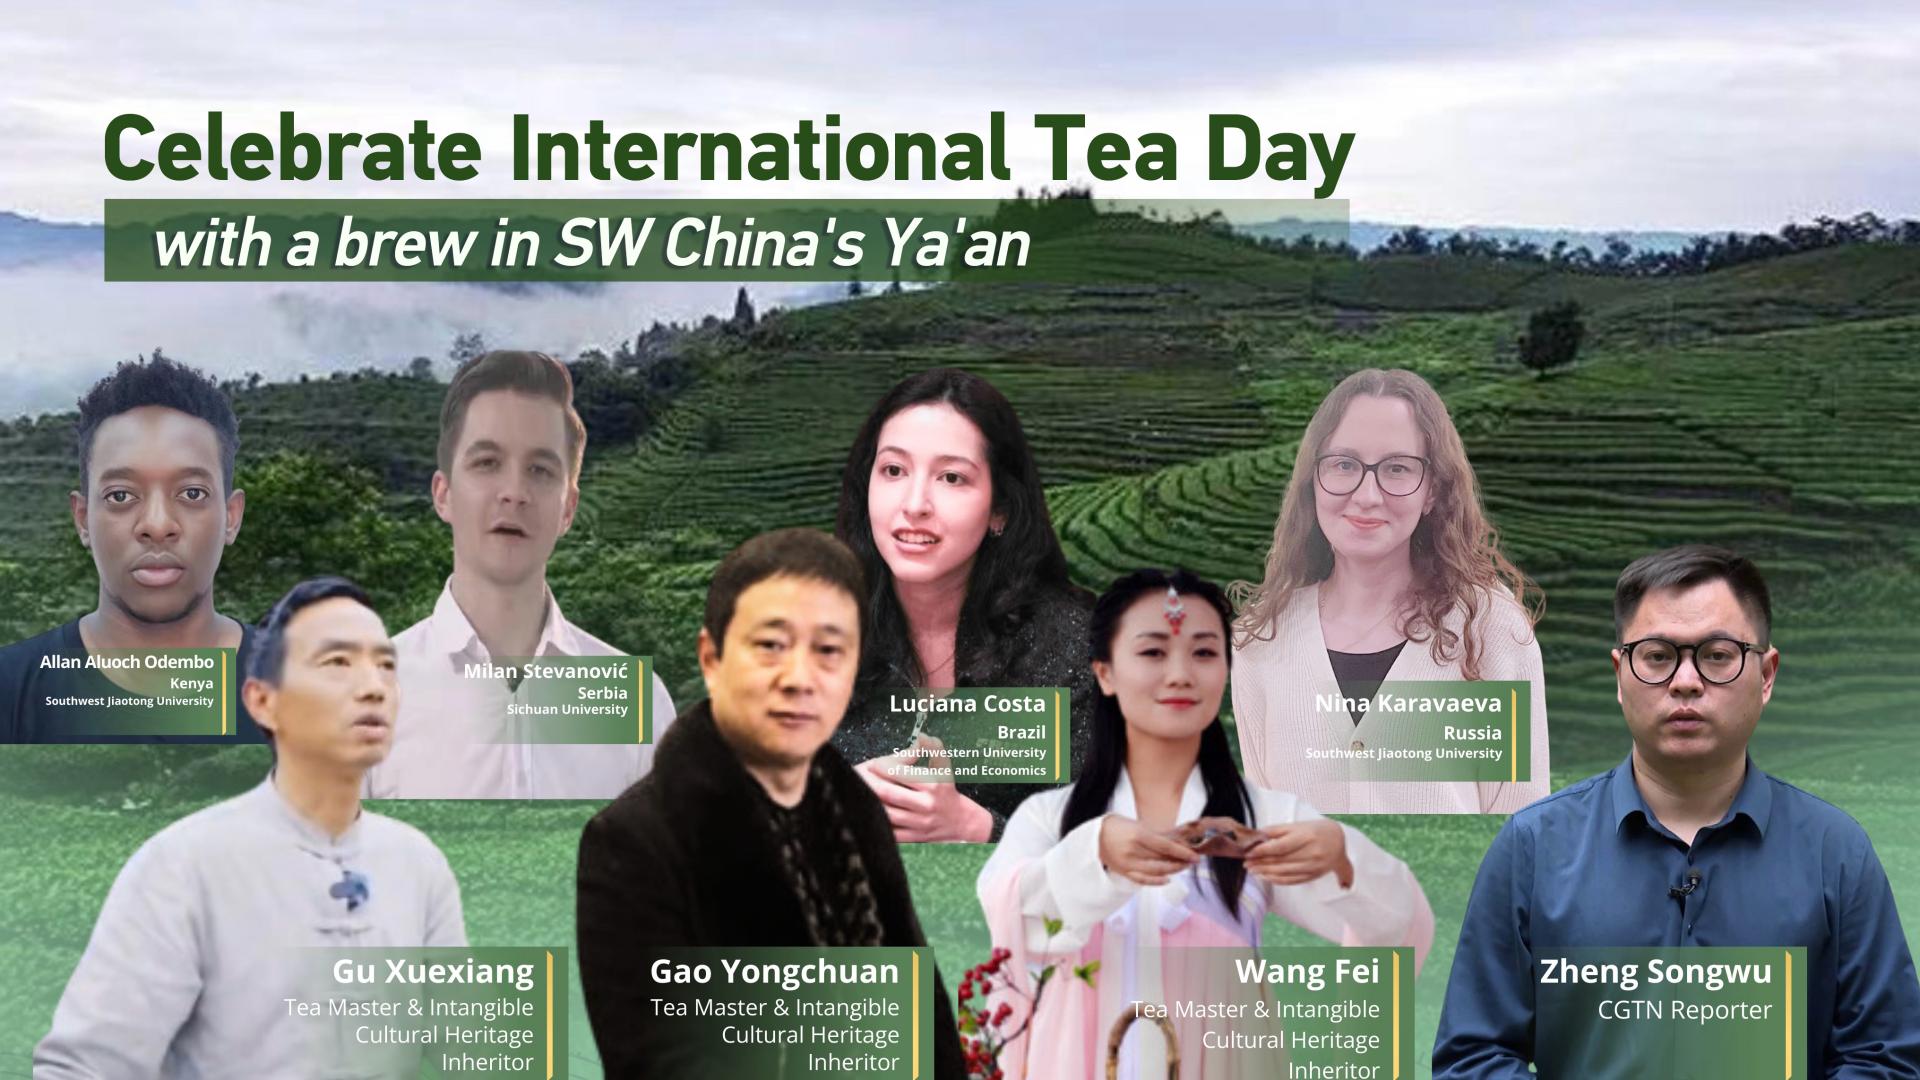 Live: Celebrate International Tea Day with a brew in SW China’s Ya’an [Video]